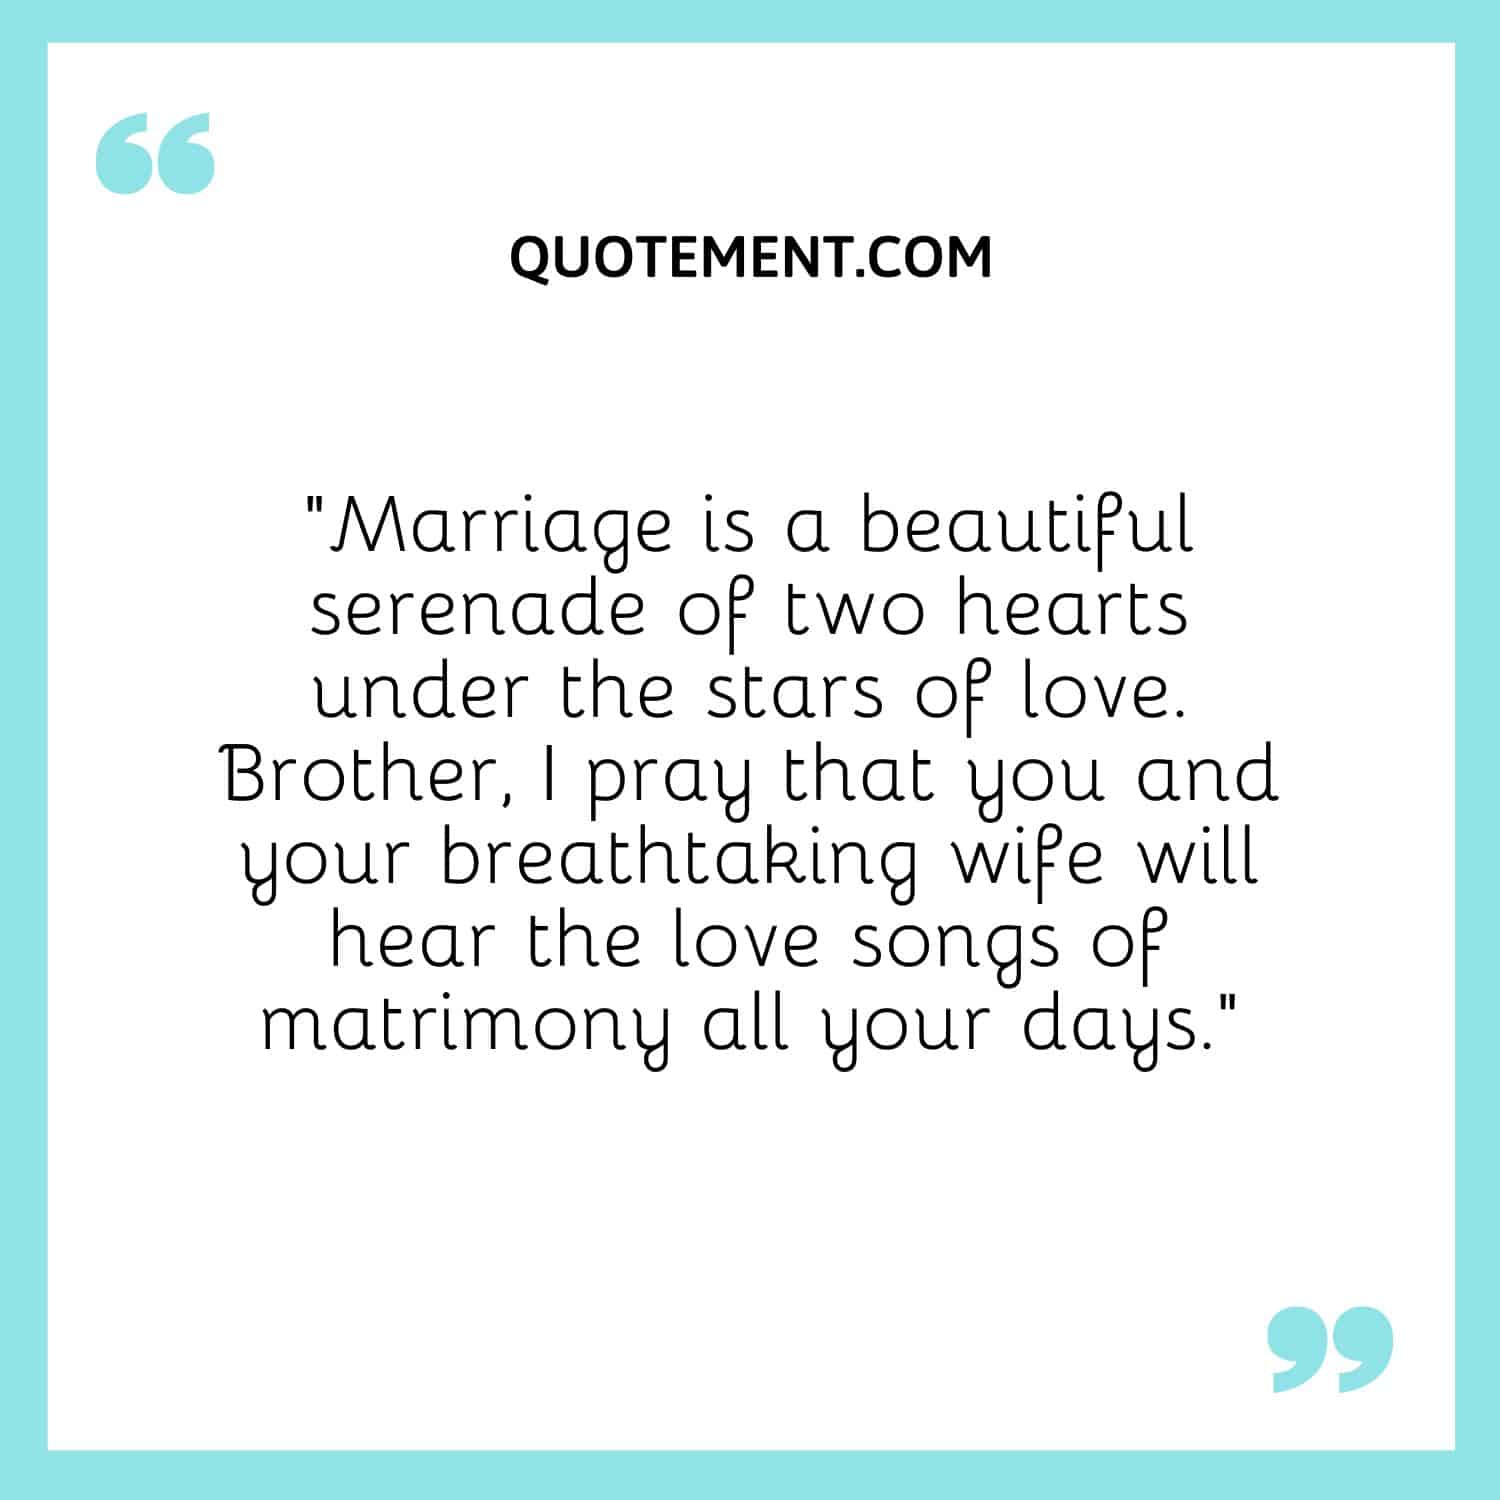 Marriage is a beautiful serenade of two hearts under the stars of love